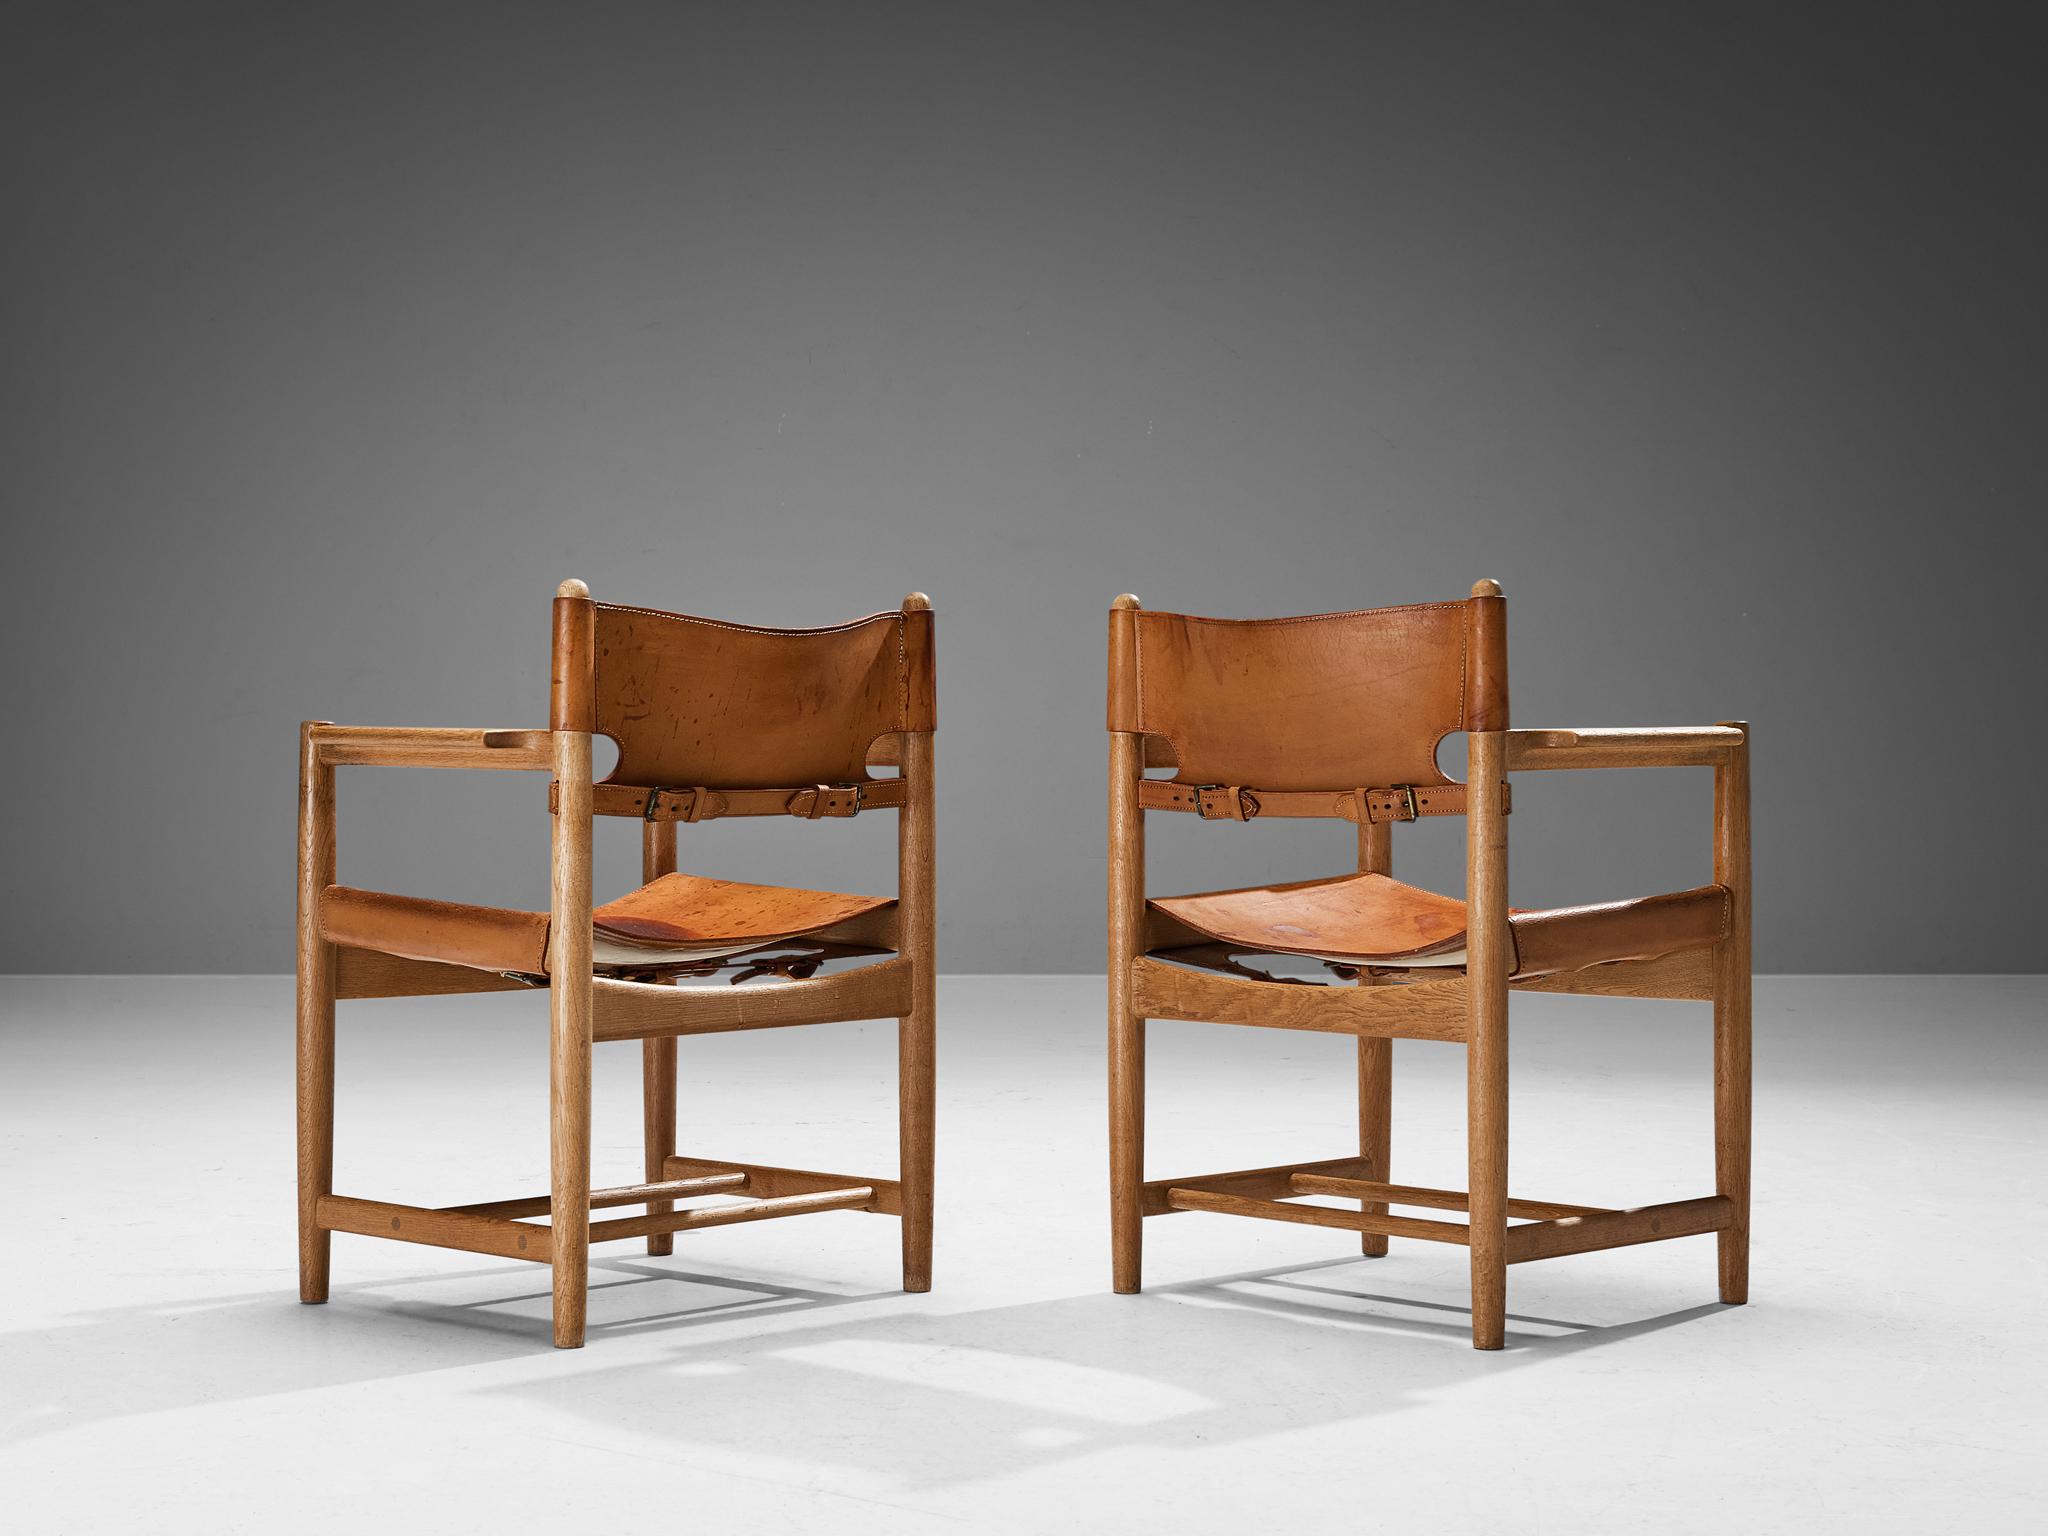 Børge Mogensen for Fredericia Stolefabrik, pair of armchairs model 3237, oak, leather, Denmark, 1964

This pair of armchairs reminds of the classical foldable 'director-chairs', yet this design by Danish designer Børge Mogensen (1914-1972) is from